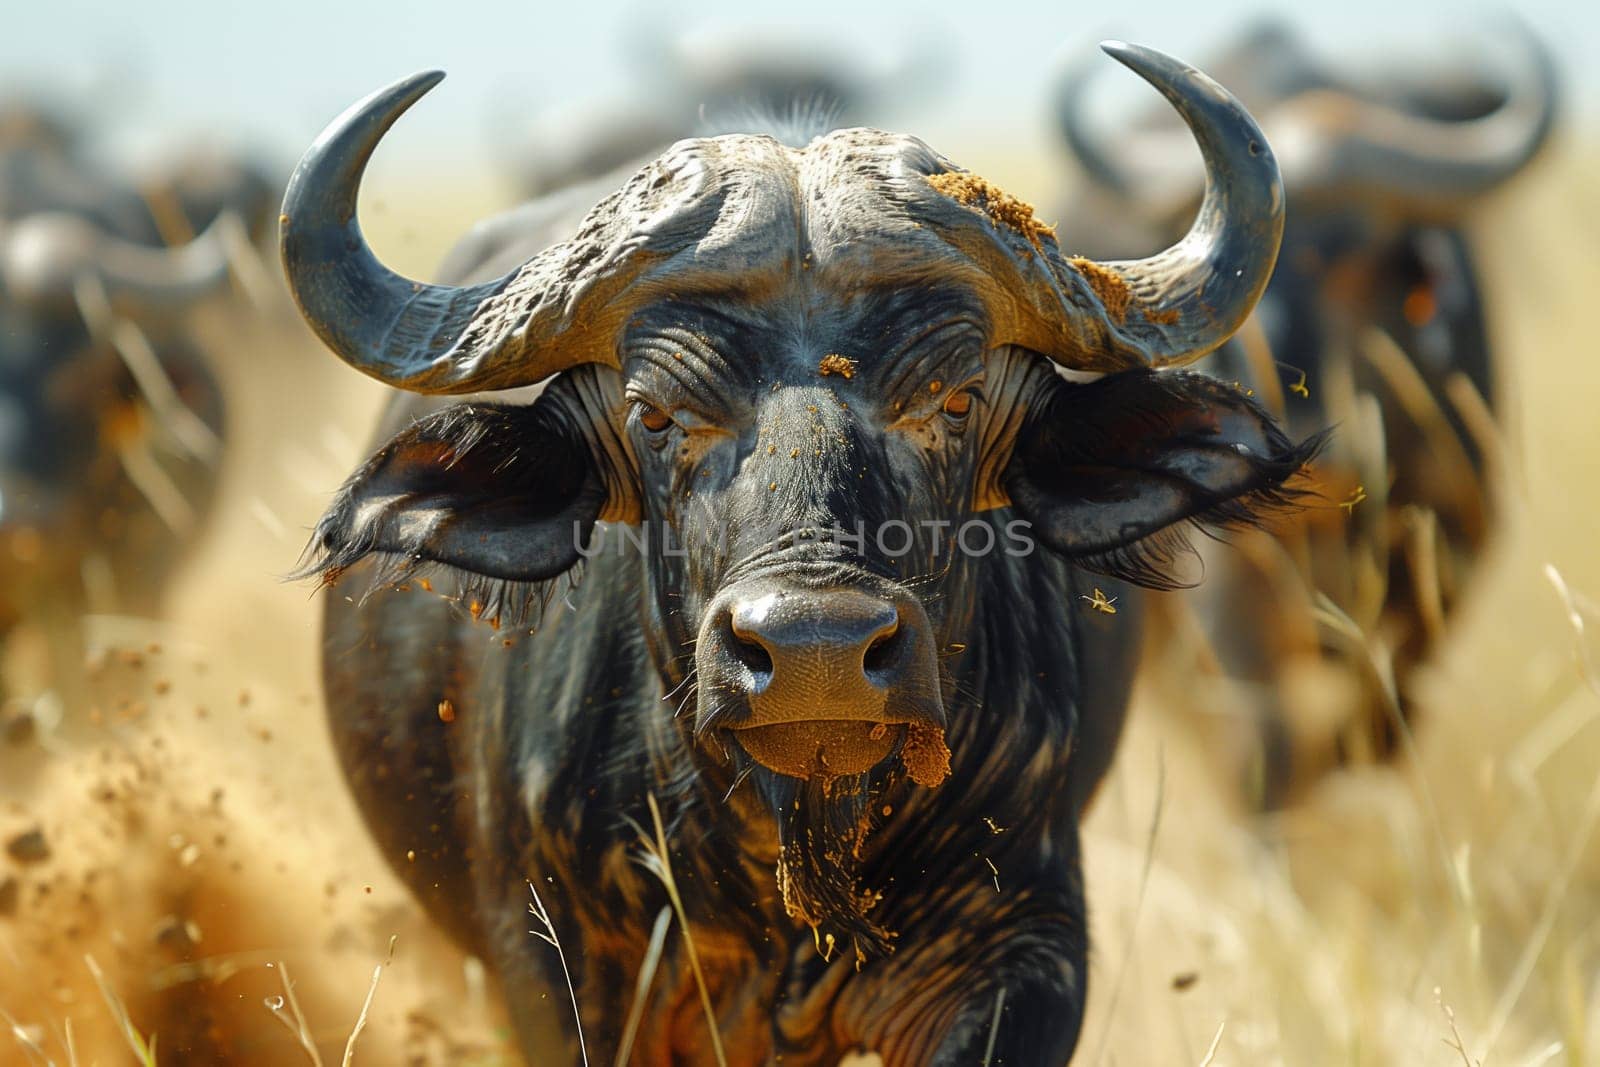 A herd of working buffalo with their majestic horns and strong snouts are grazing in a picturesque landscape, inspiring artists to capture their beauty in paintings using natural materials